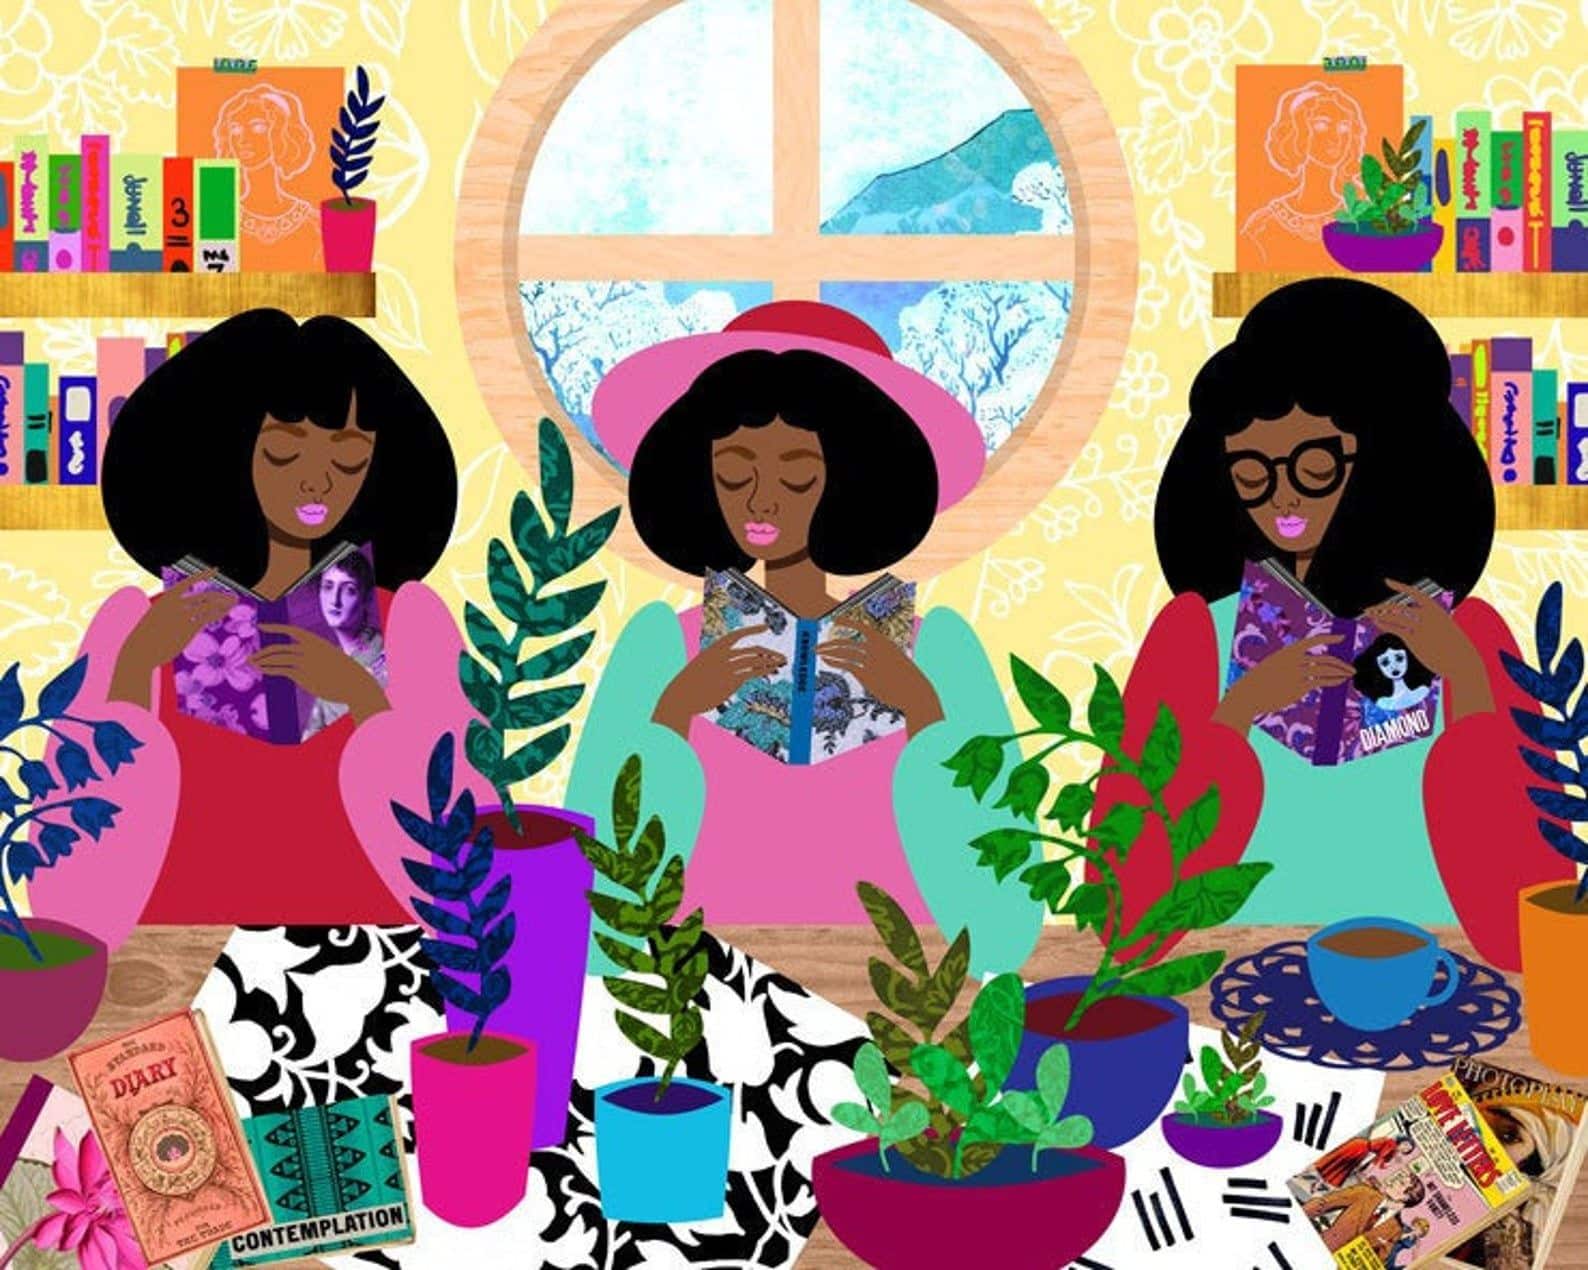 Vibrant illustration by artist Tabitha Brown, available at her PairABirds Etsy shop.